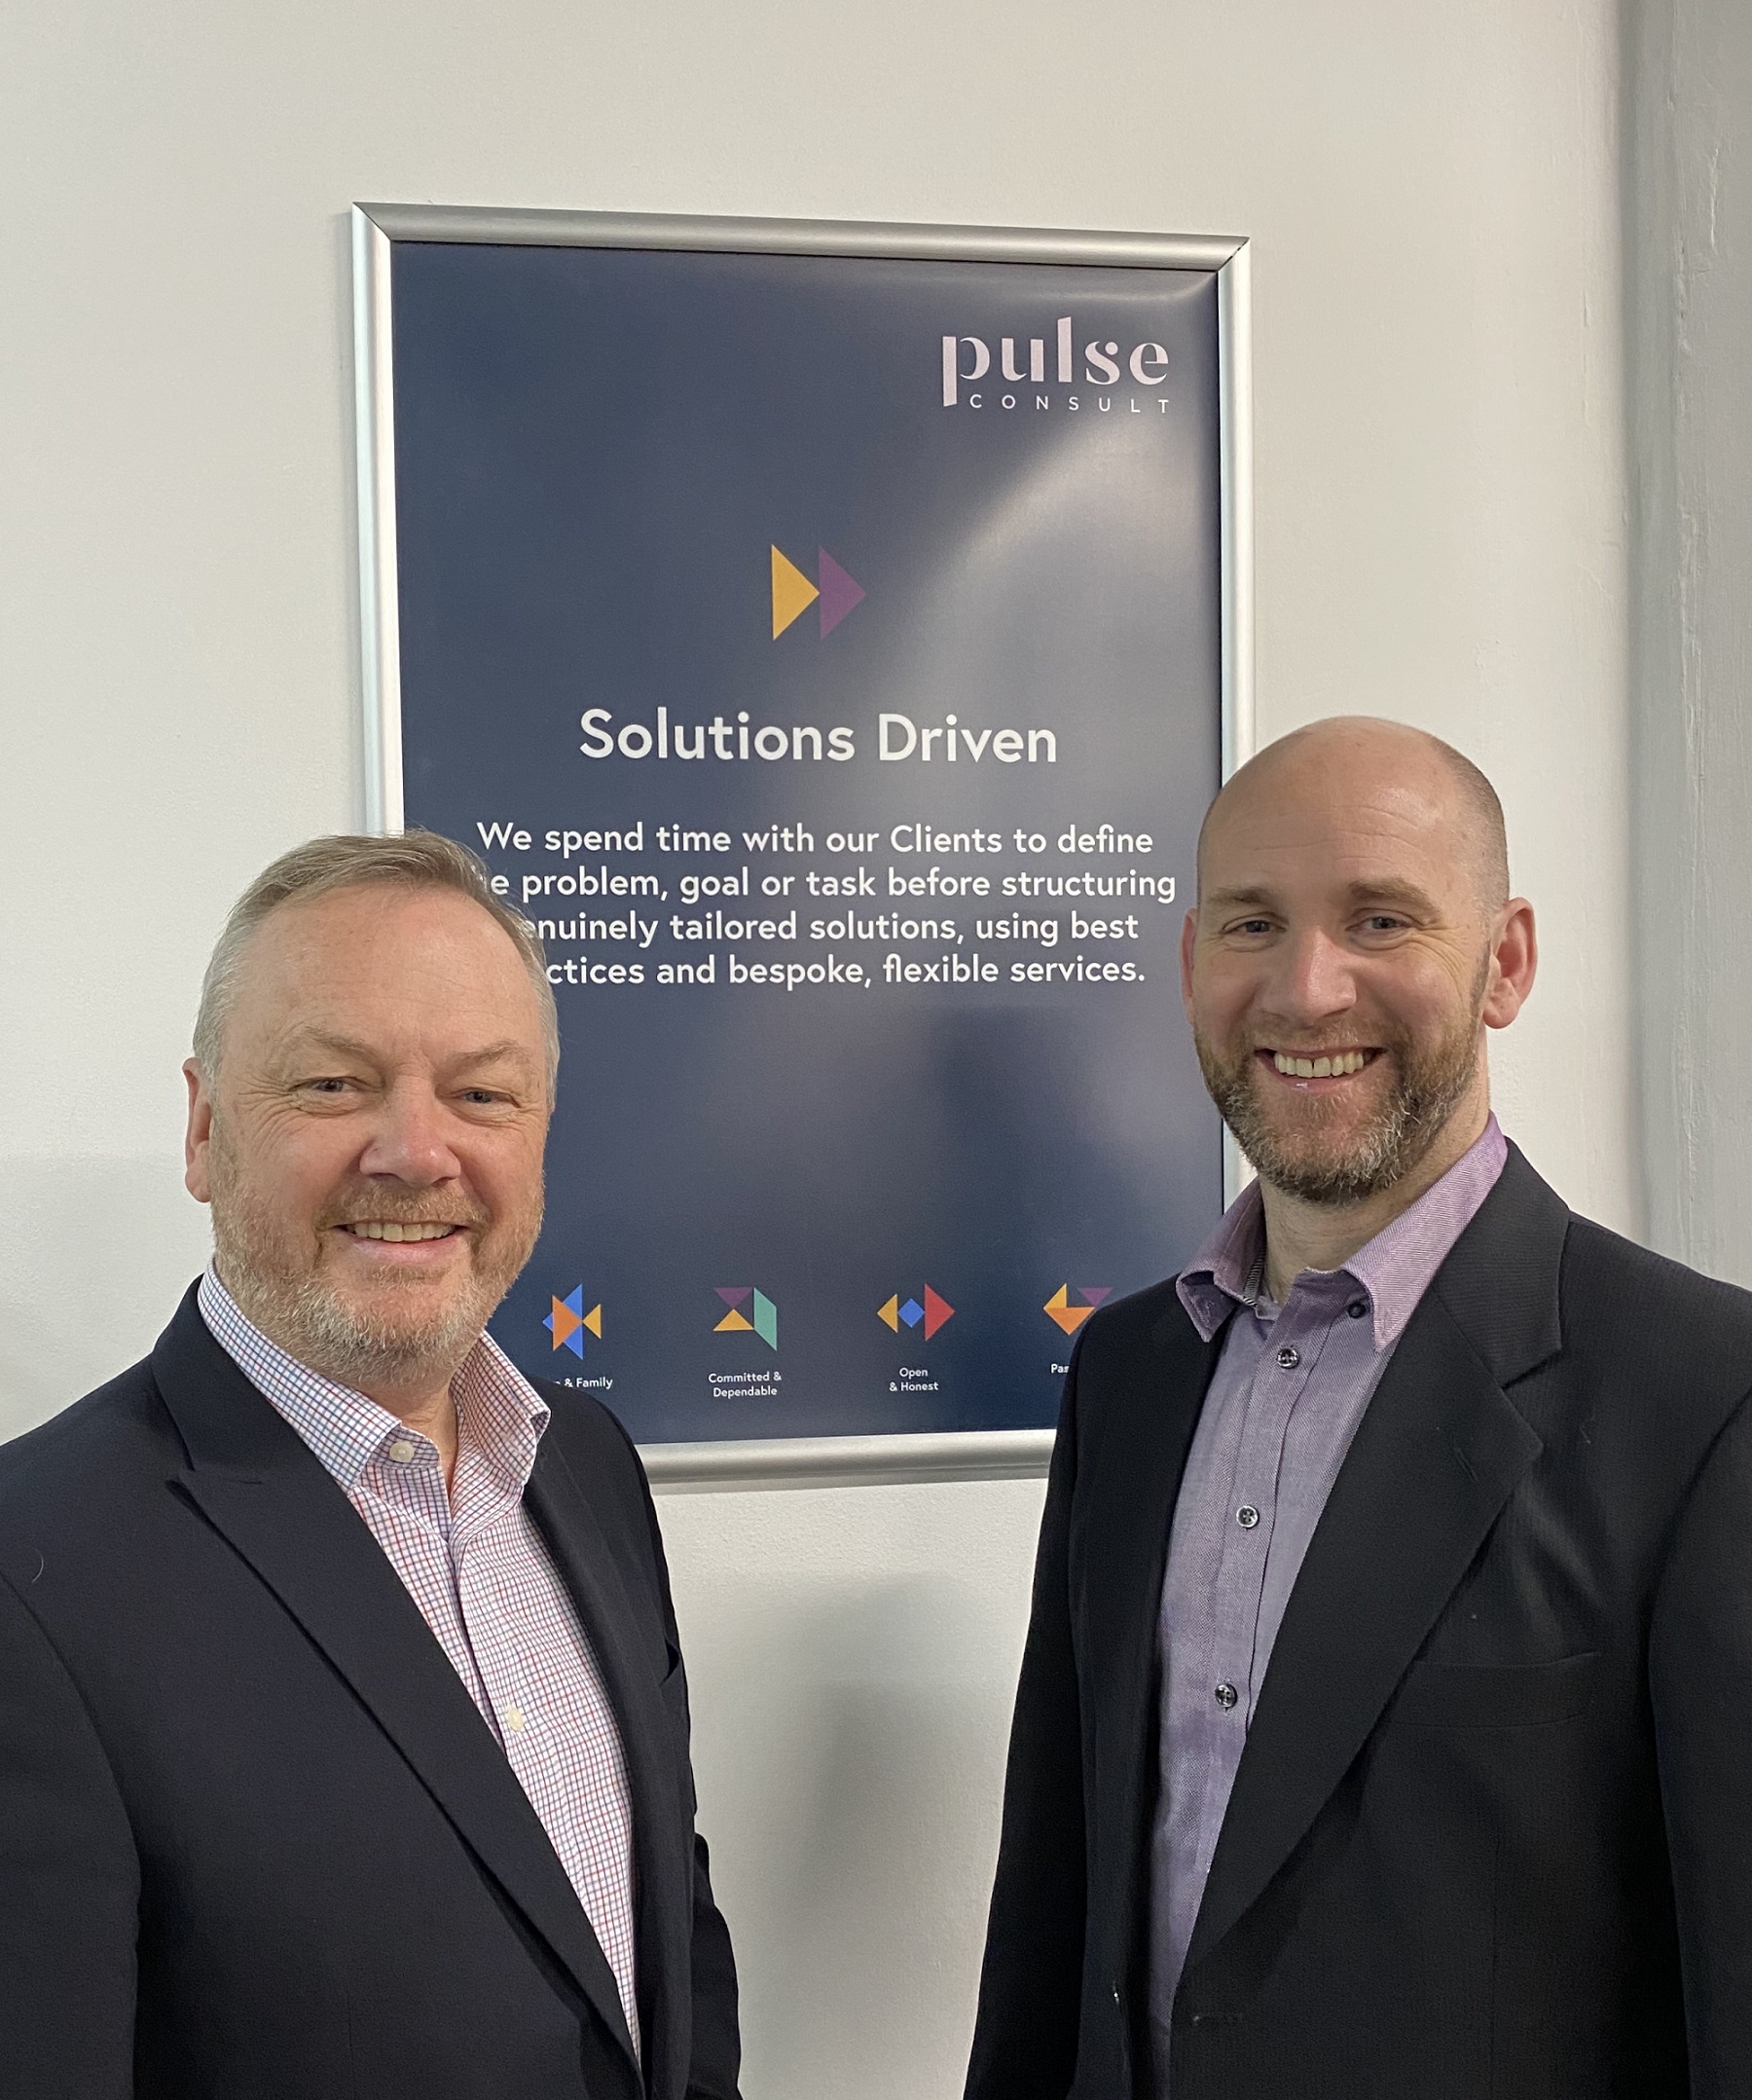 PULSE CONSULT APPOINTED TO LONDON HIGHER EDUCATION FRAMEWORK @Pulse_Consul